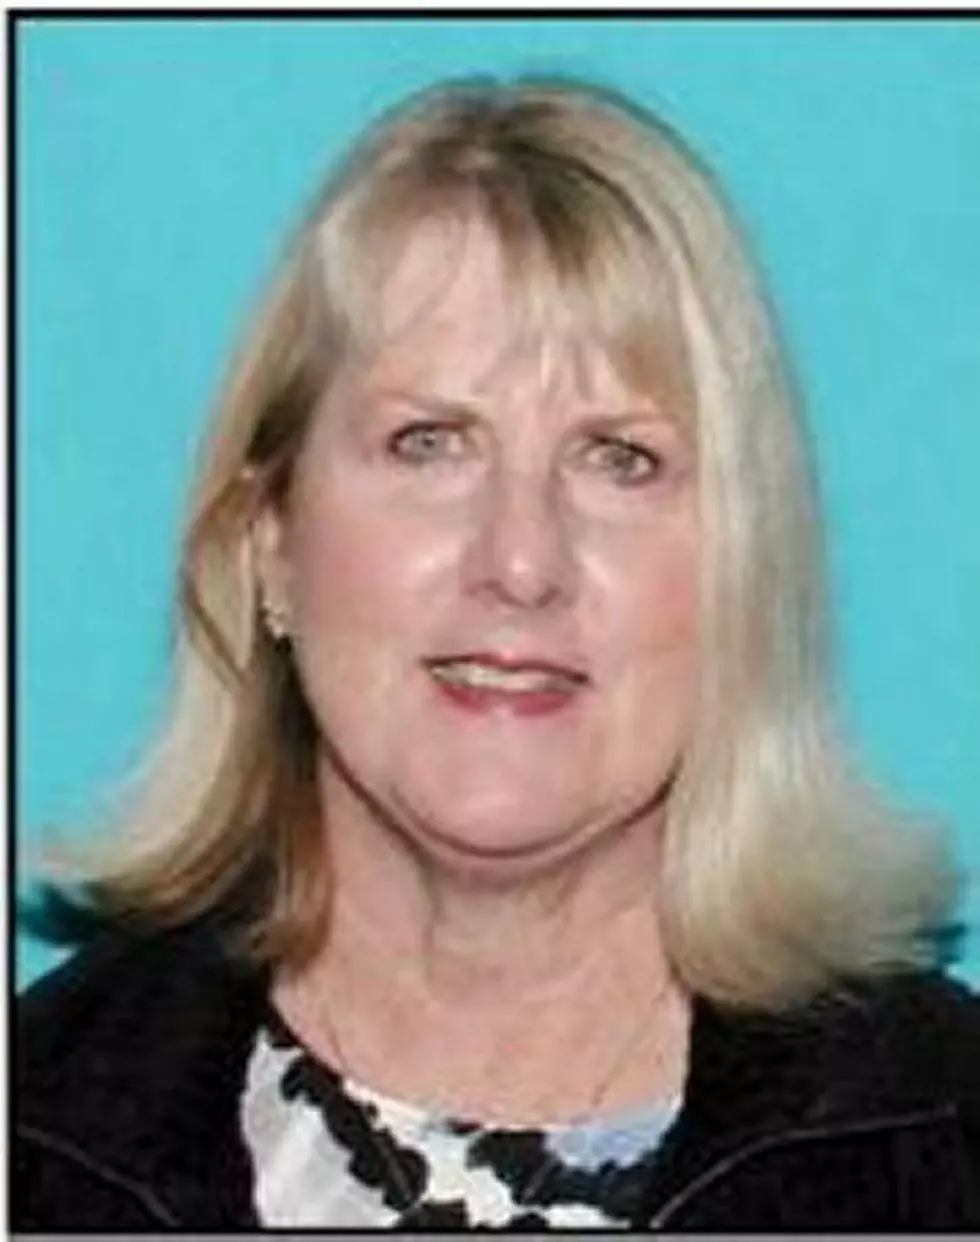 Have You Seen This Missing Canyon County Woman?